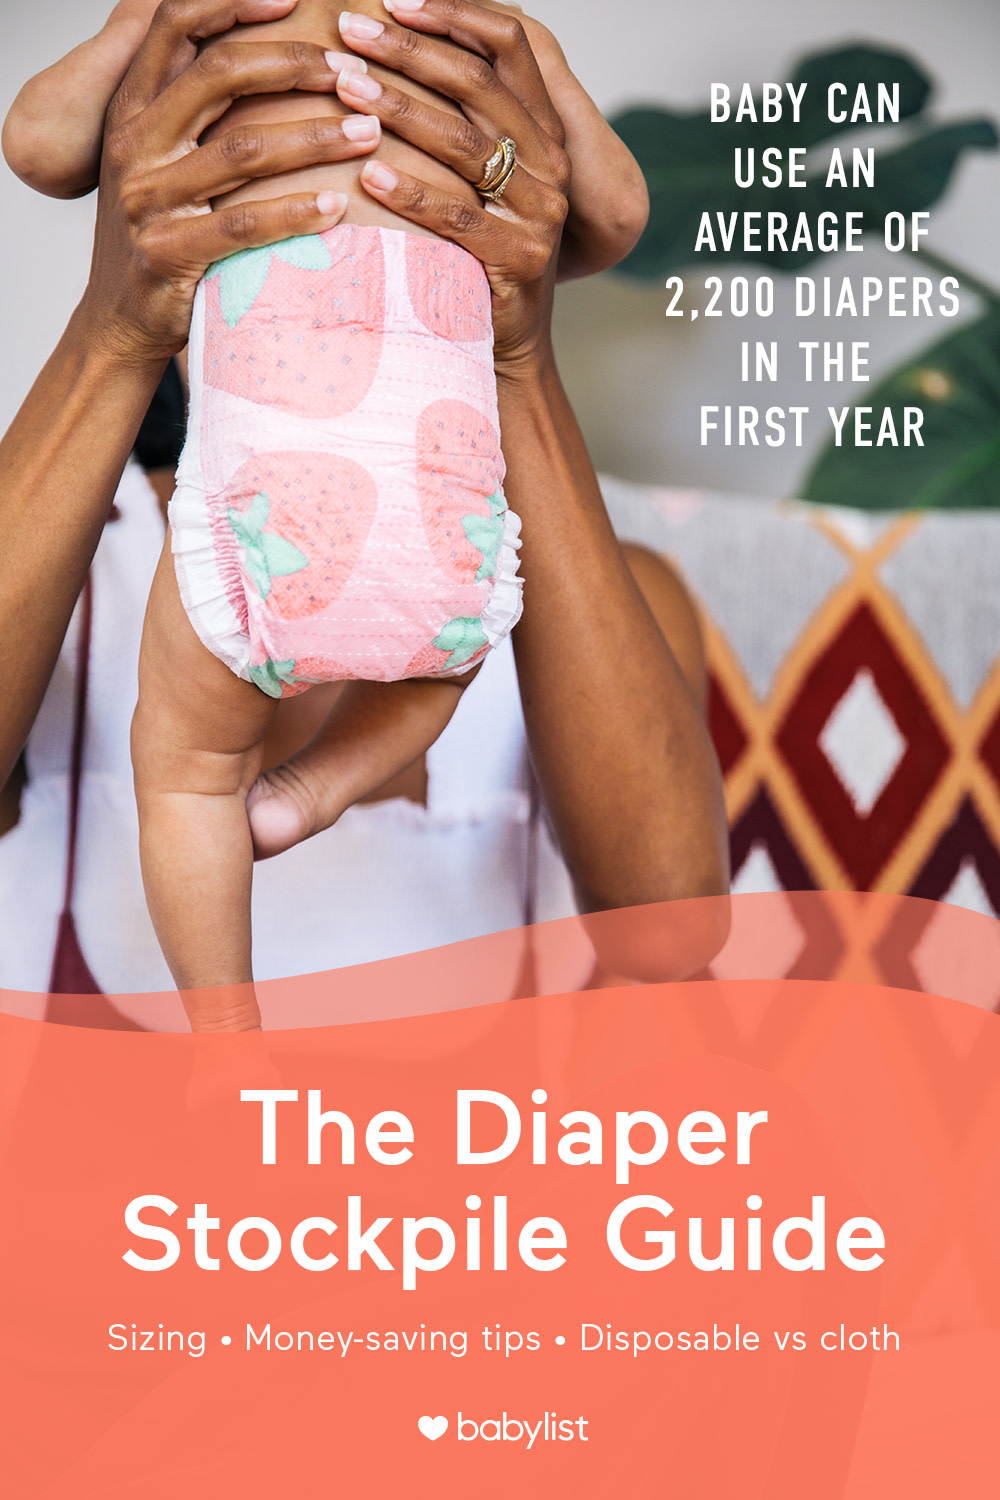 Babies go through a lot of diapers. Here